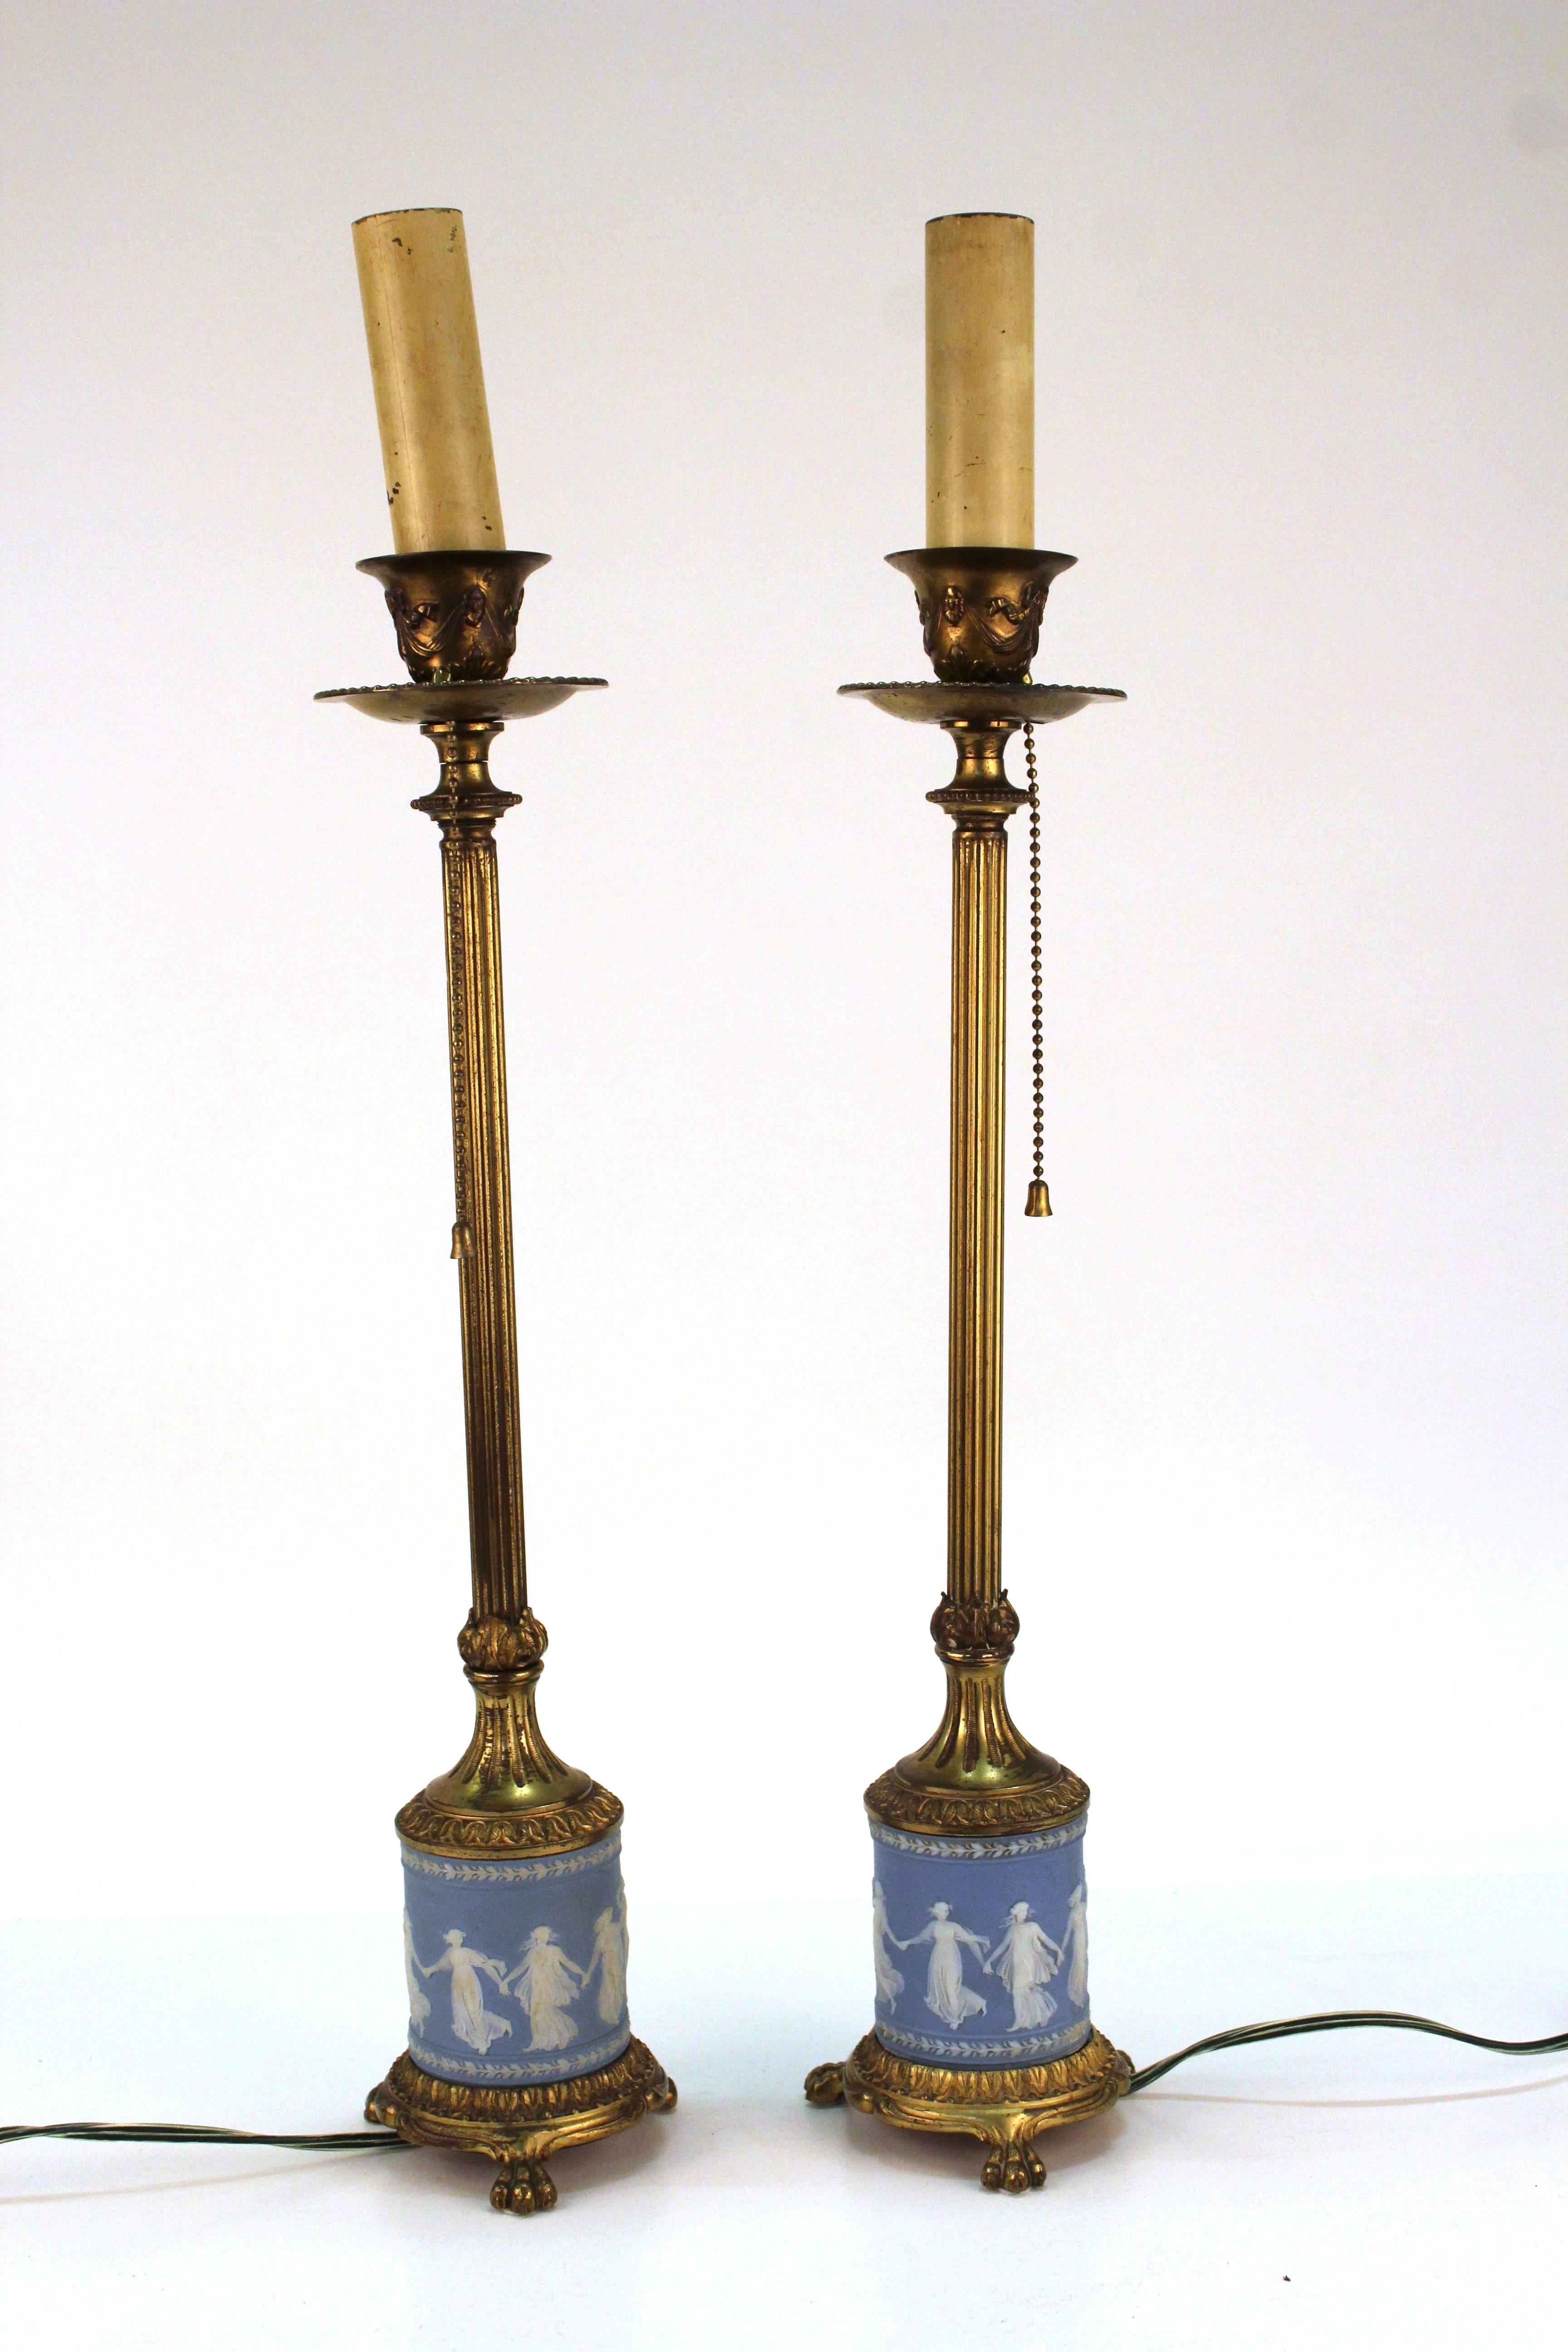 A pair of table lamps with wedgwood base. The lamps are gilt and stand on three clawed feet. Decorative details include long skinny column necks, acanthus leaves and bows along the top. The lamps are topped with faux candle sockets. Despite minor